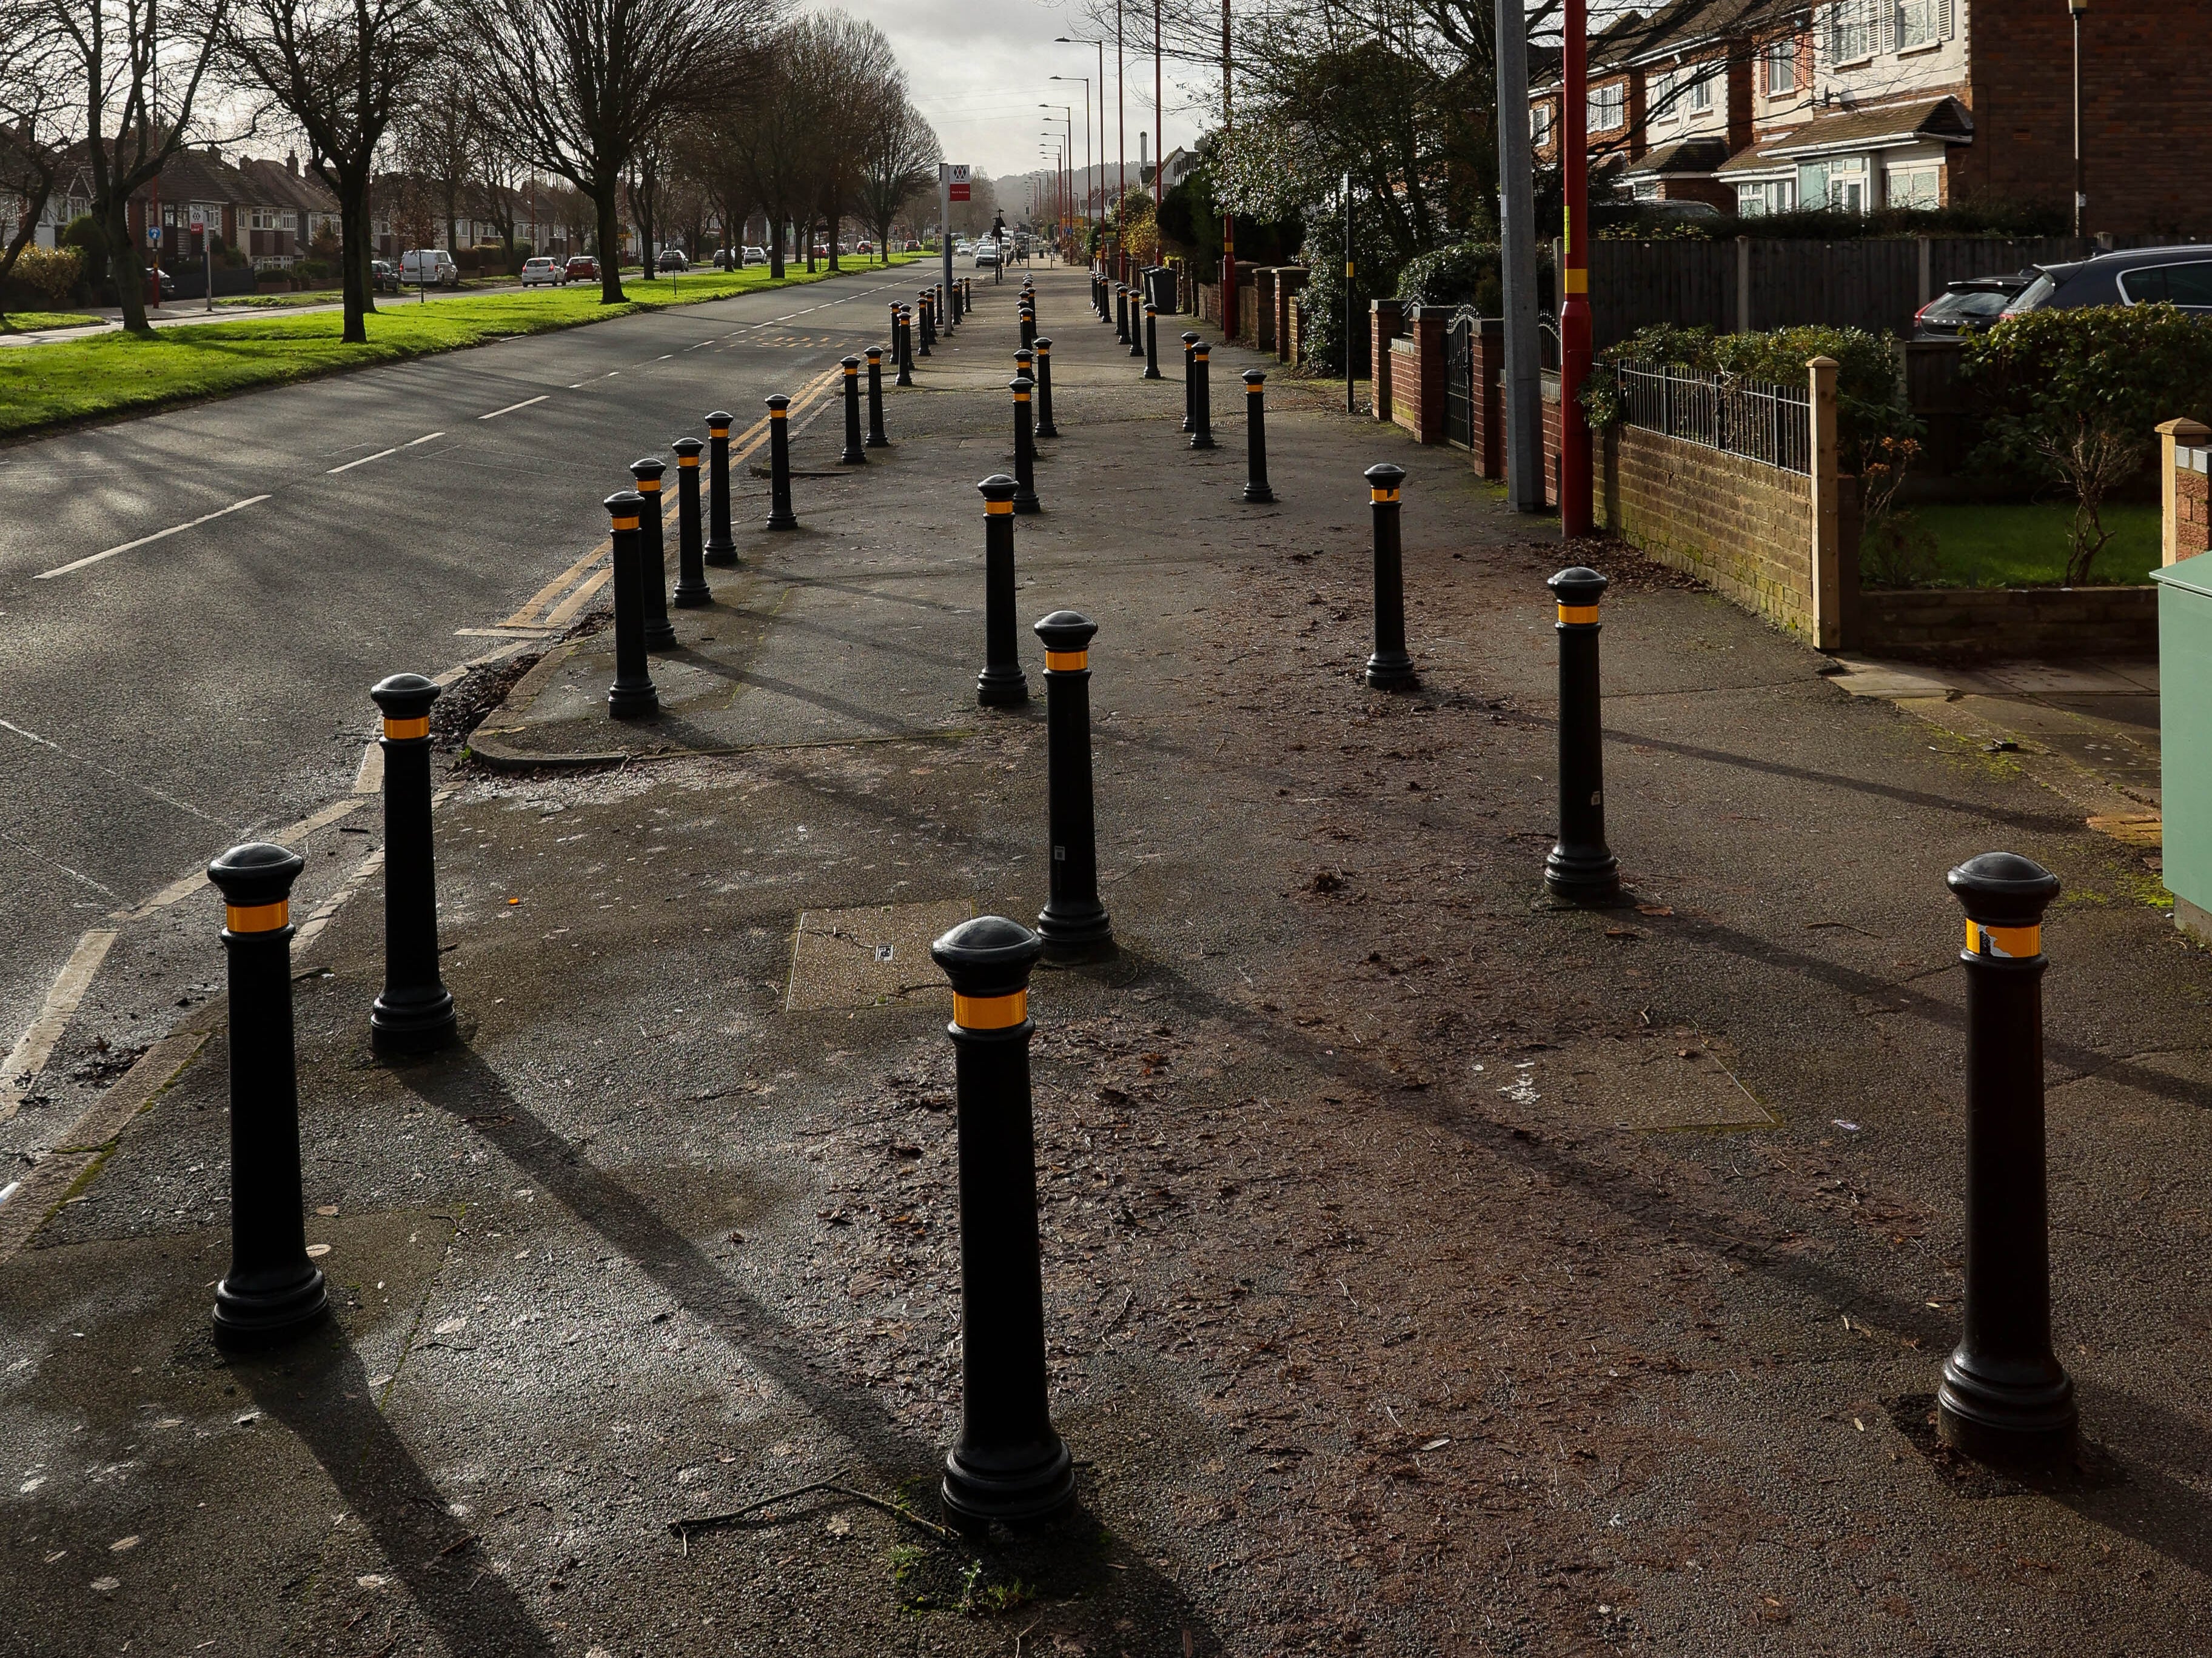 Residents have complained about bollards on a pavement in Birmingham used to stop parking near to the school